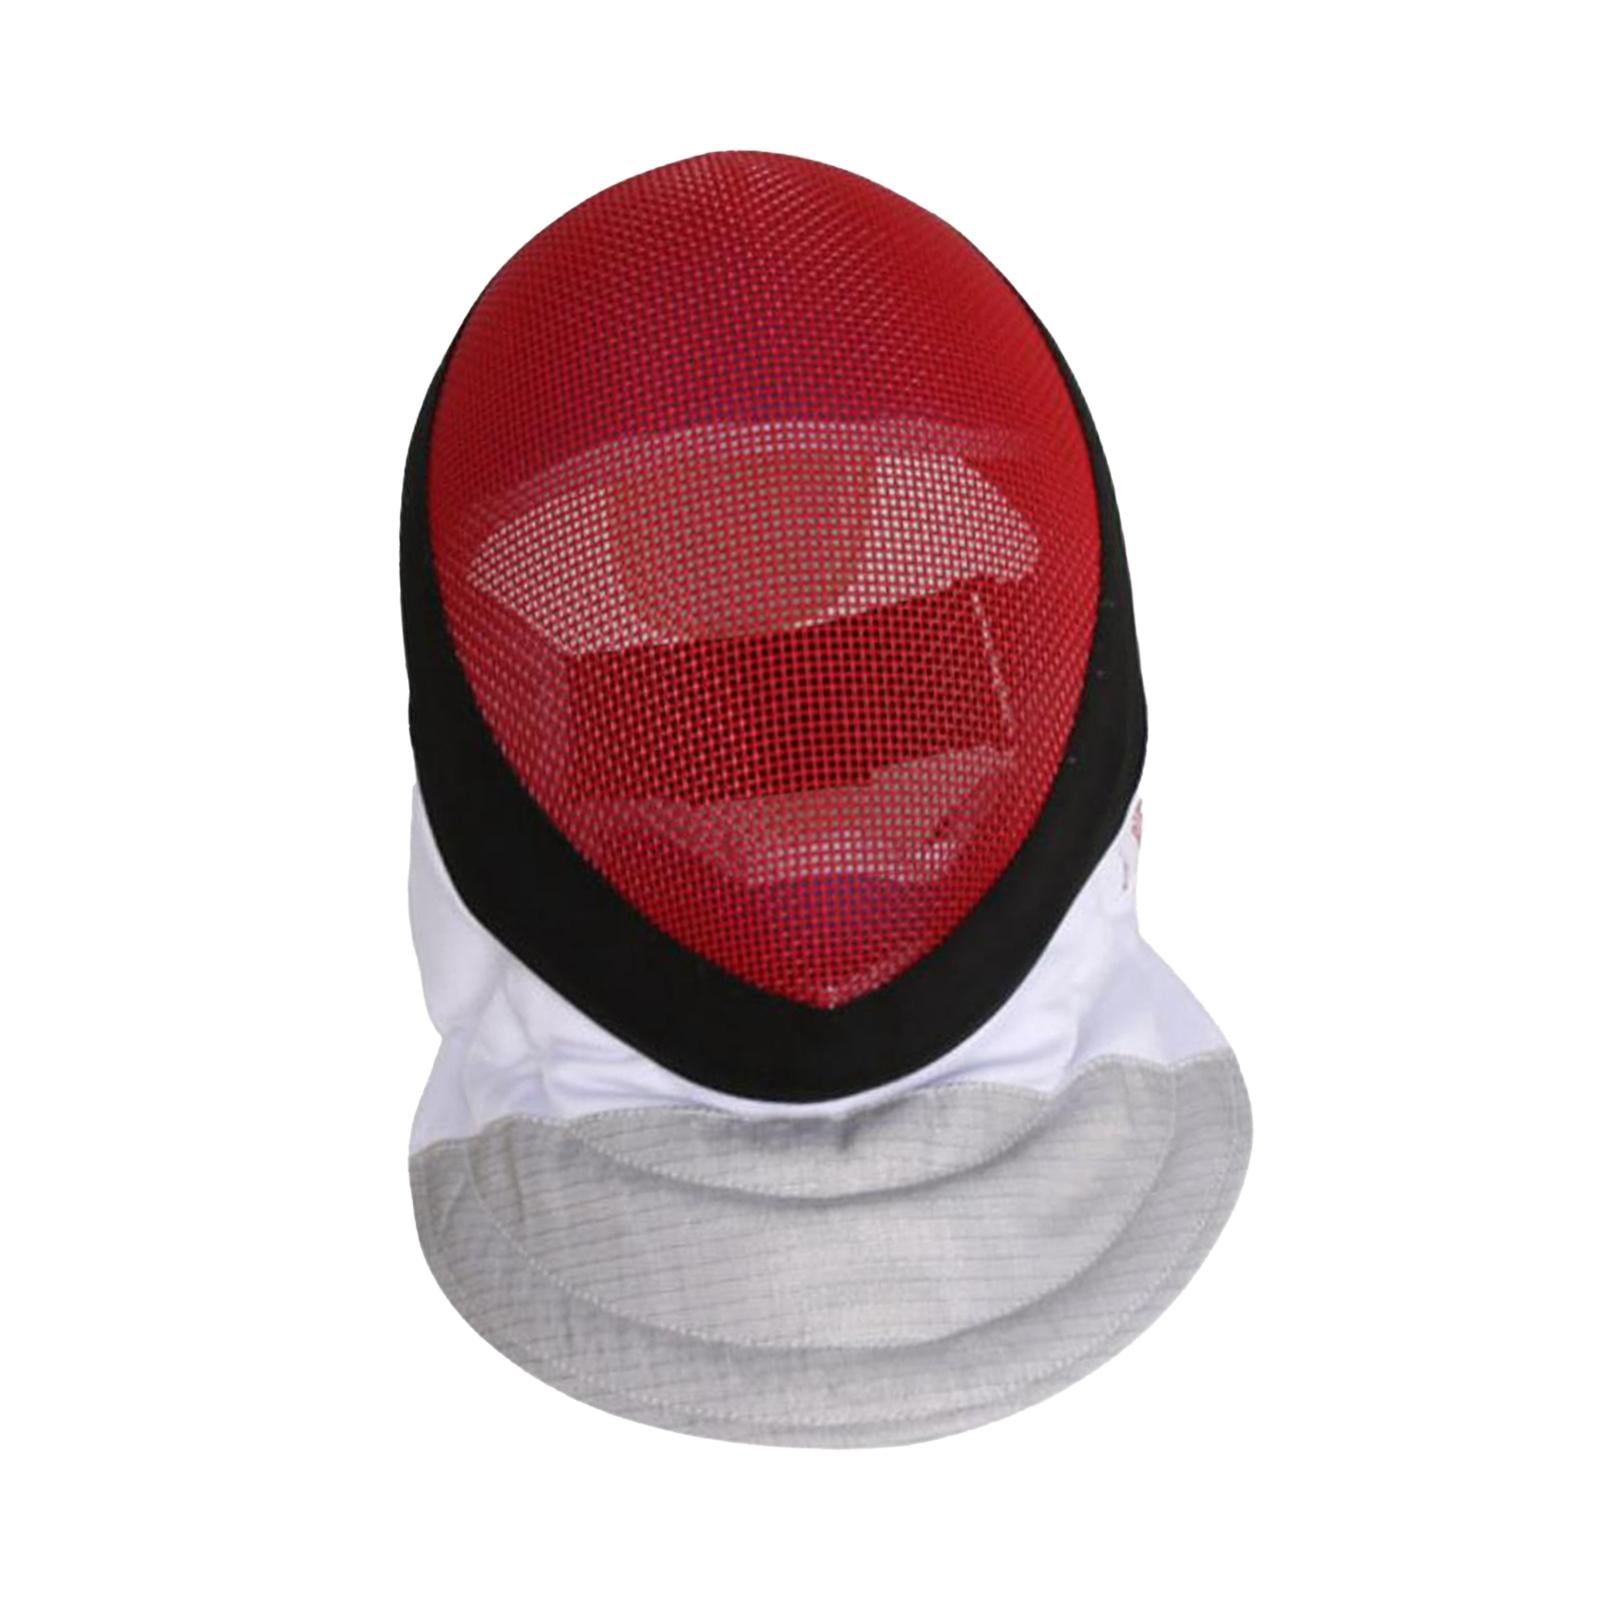 Durable Face Protector Strap Sports Fencing Equipment Cover for Men Women Practice Competition Training M SIze Red - Walmart.com